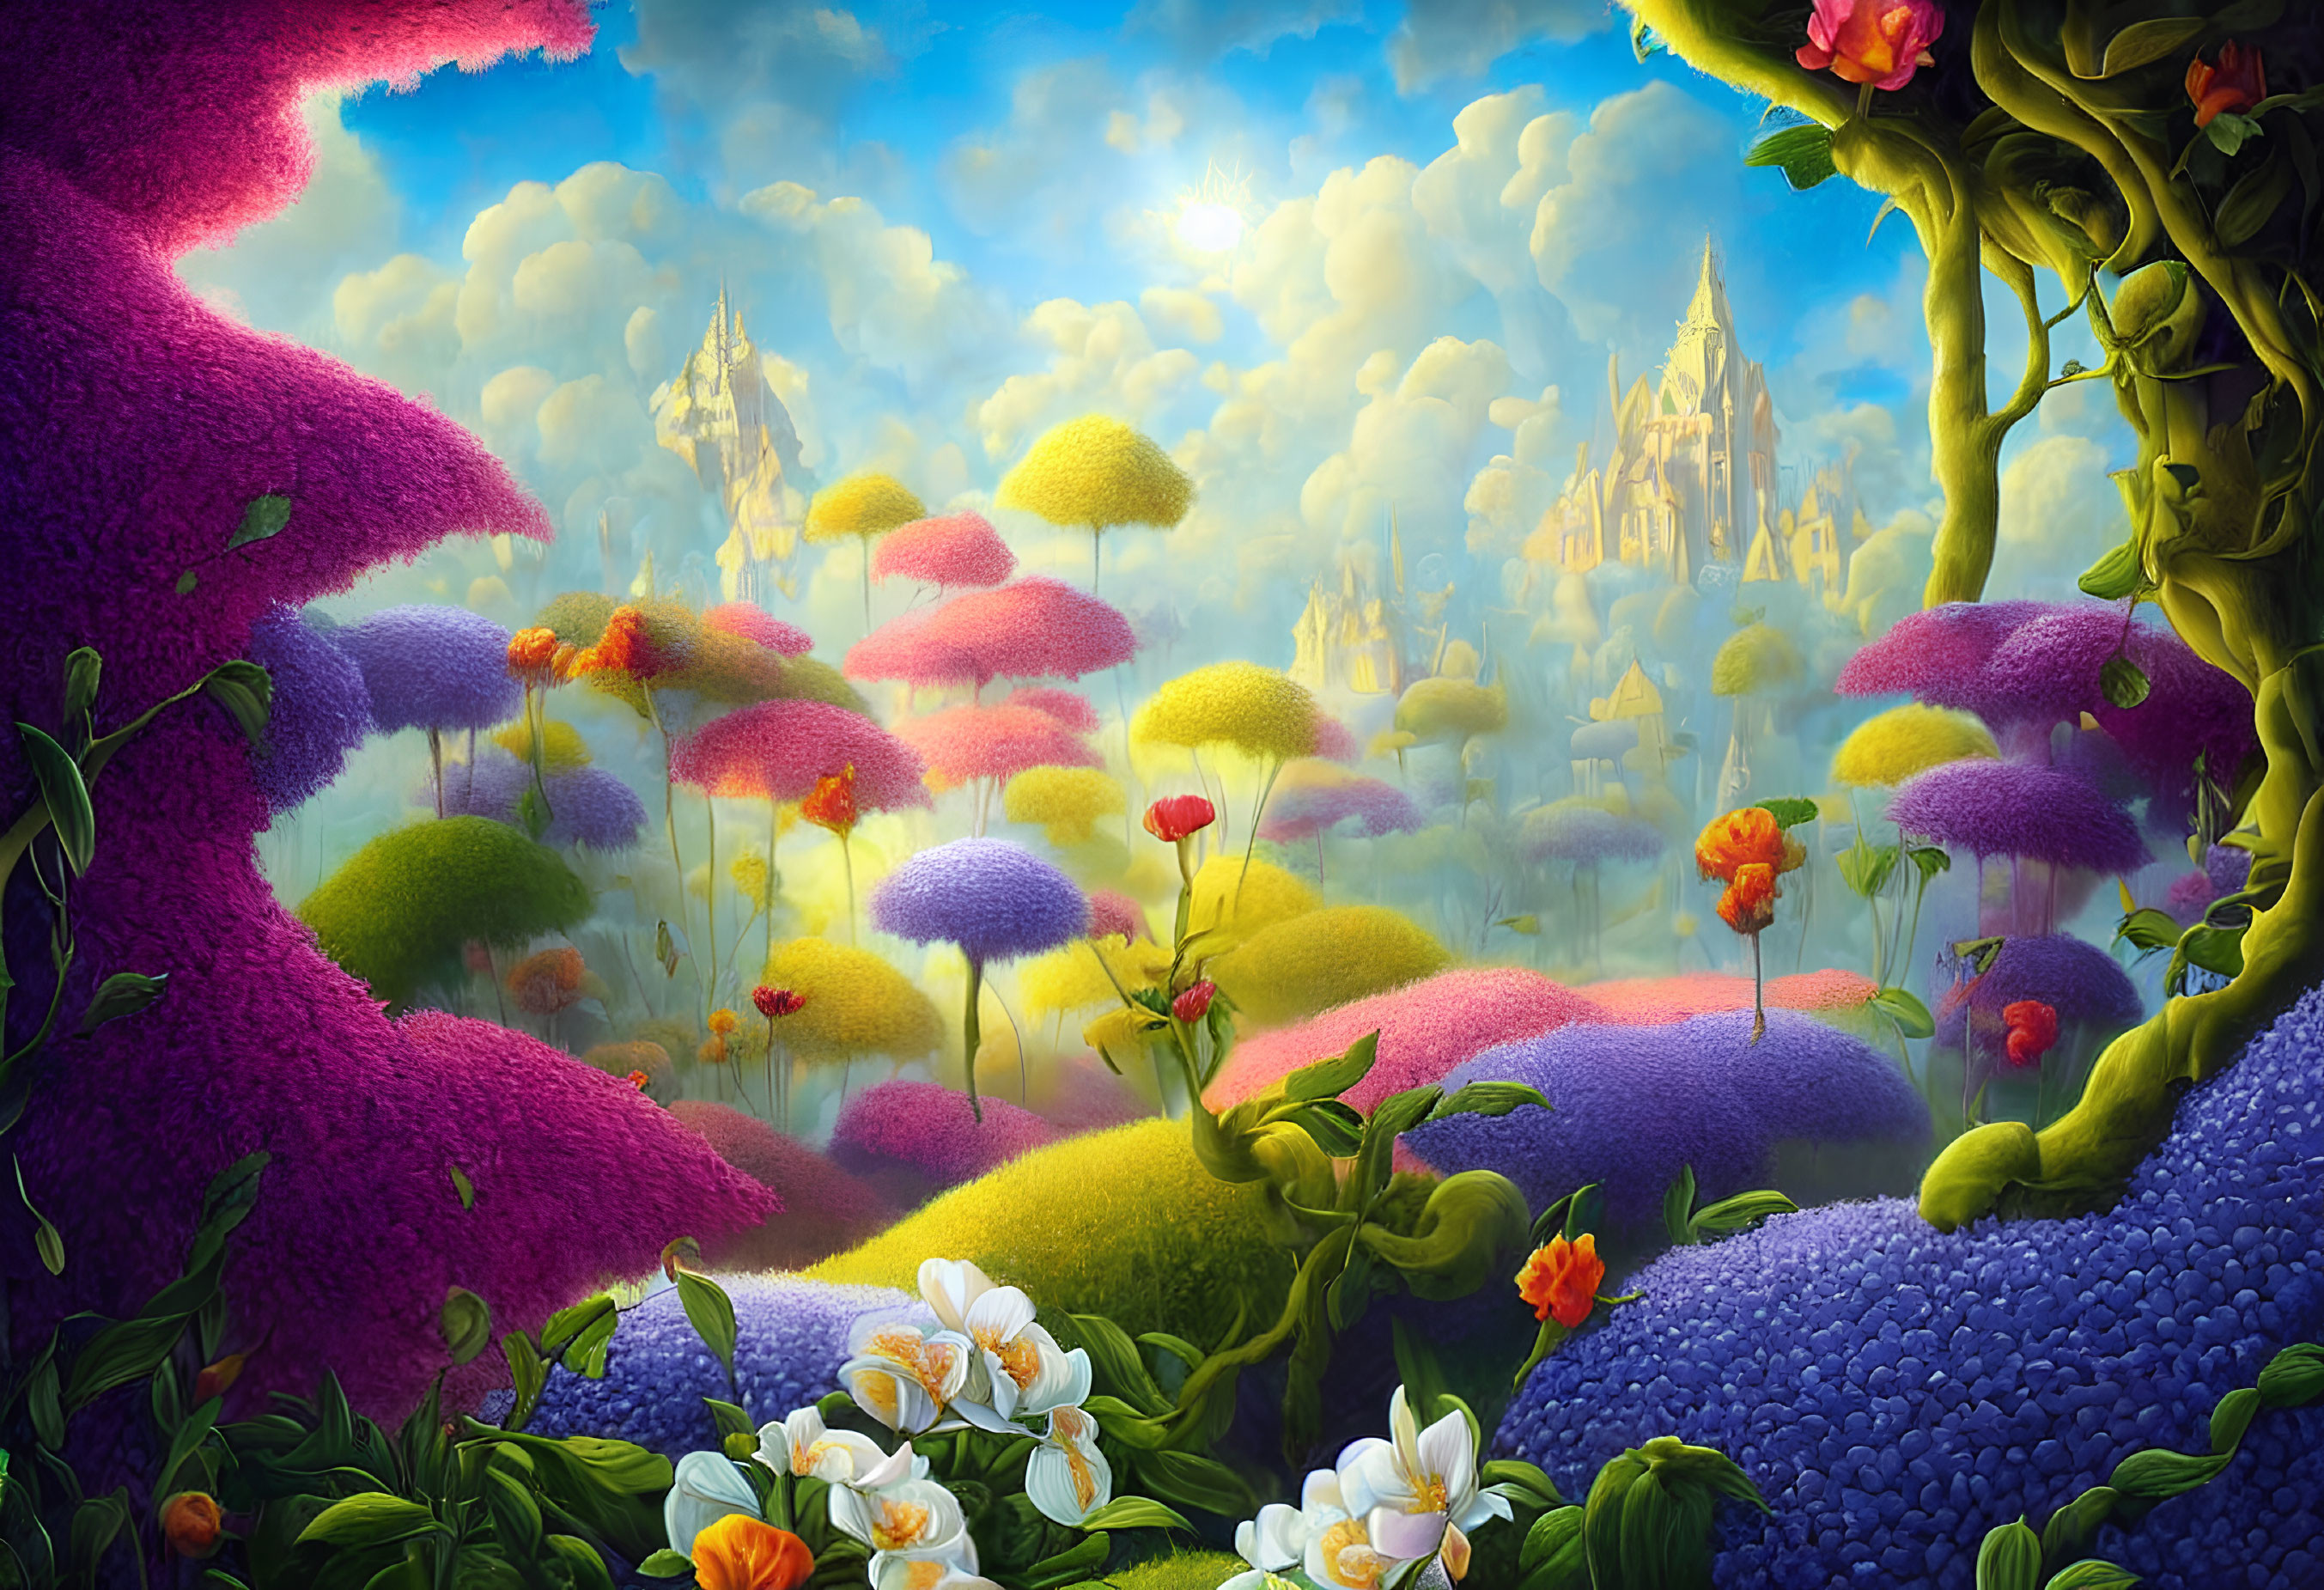 Colorful fantasy landscape with fluffy trees, luminous sky, and distant castle surrounded by lush foliage.